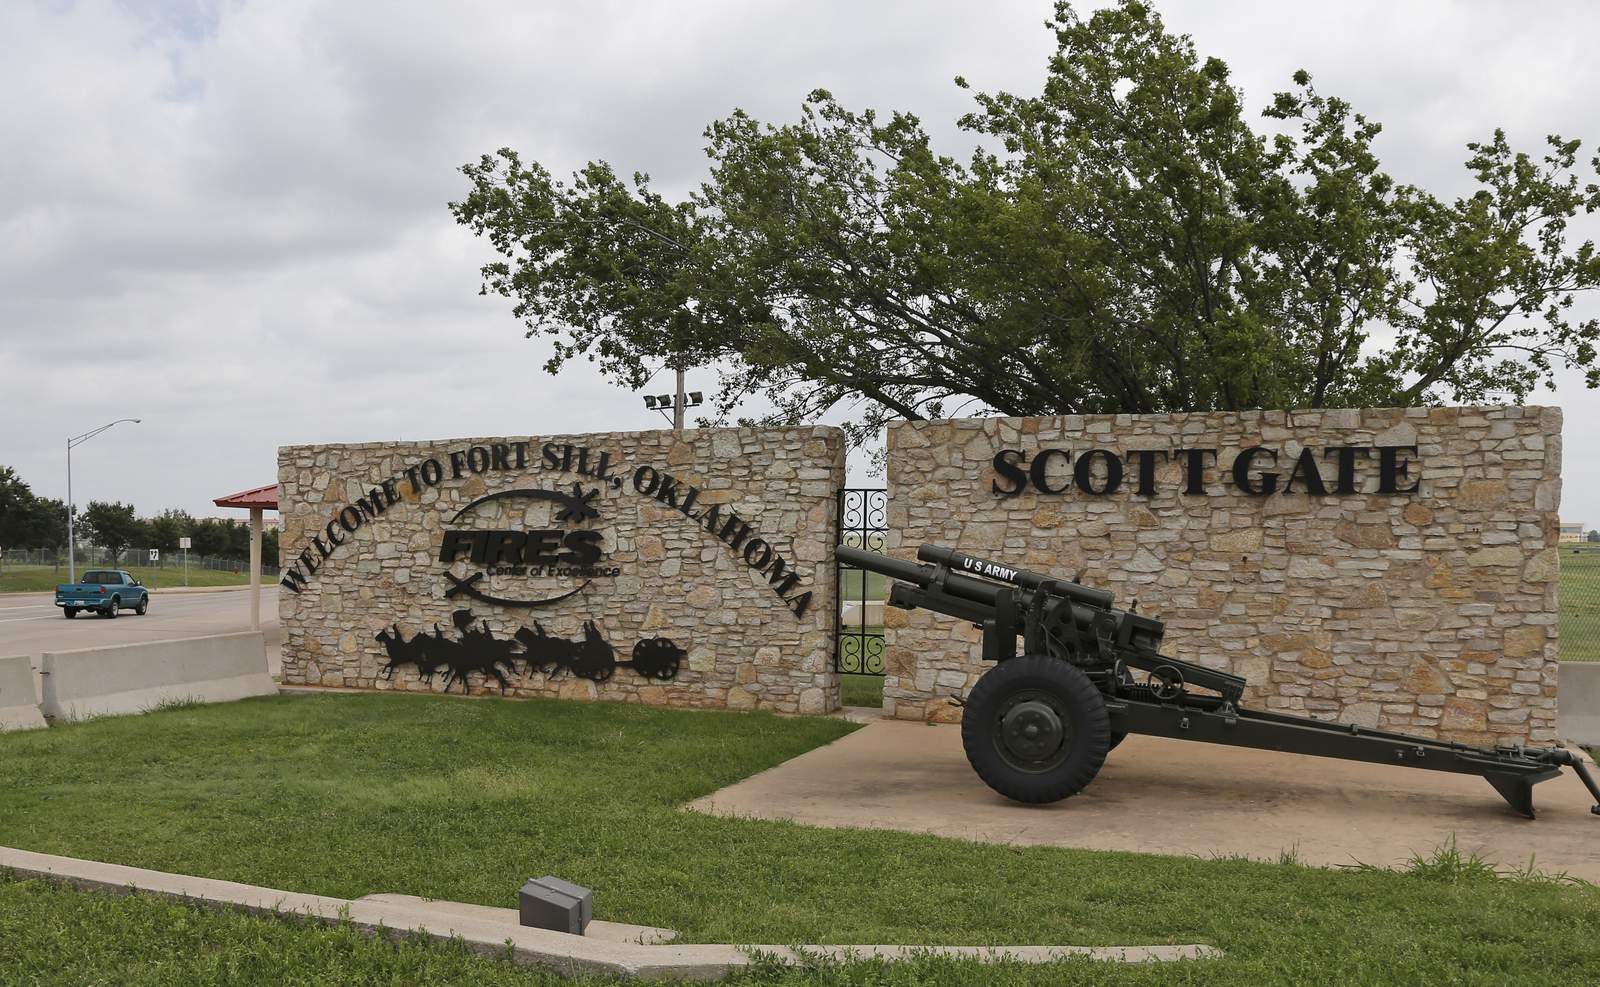 Army: Soldier says she was sexually assaulted at Fort Sill